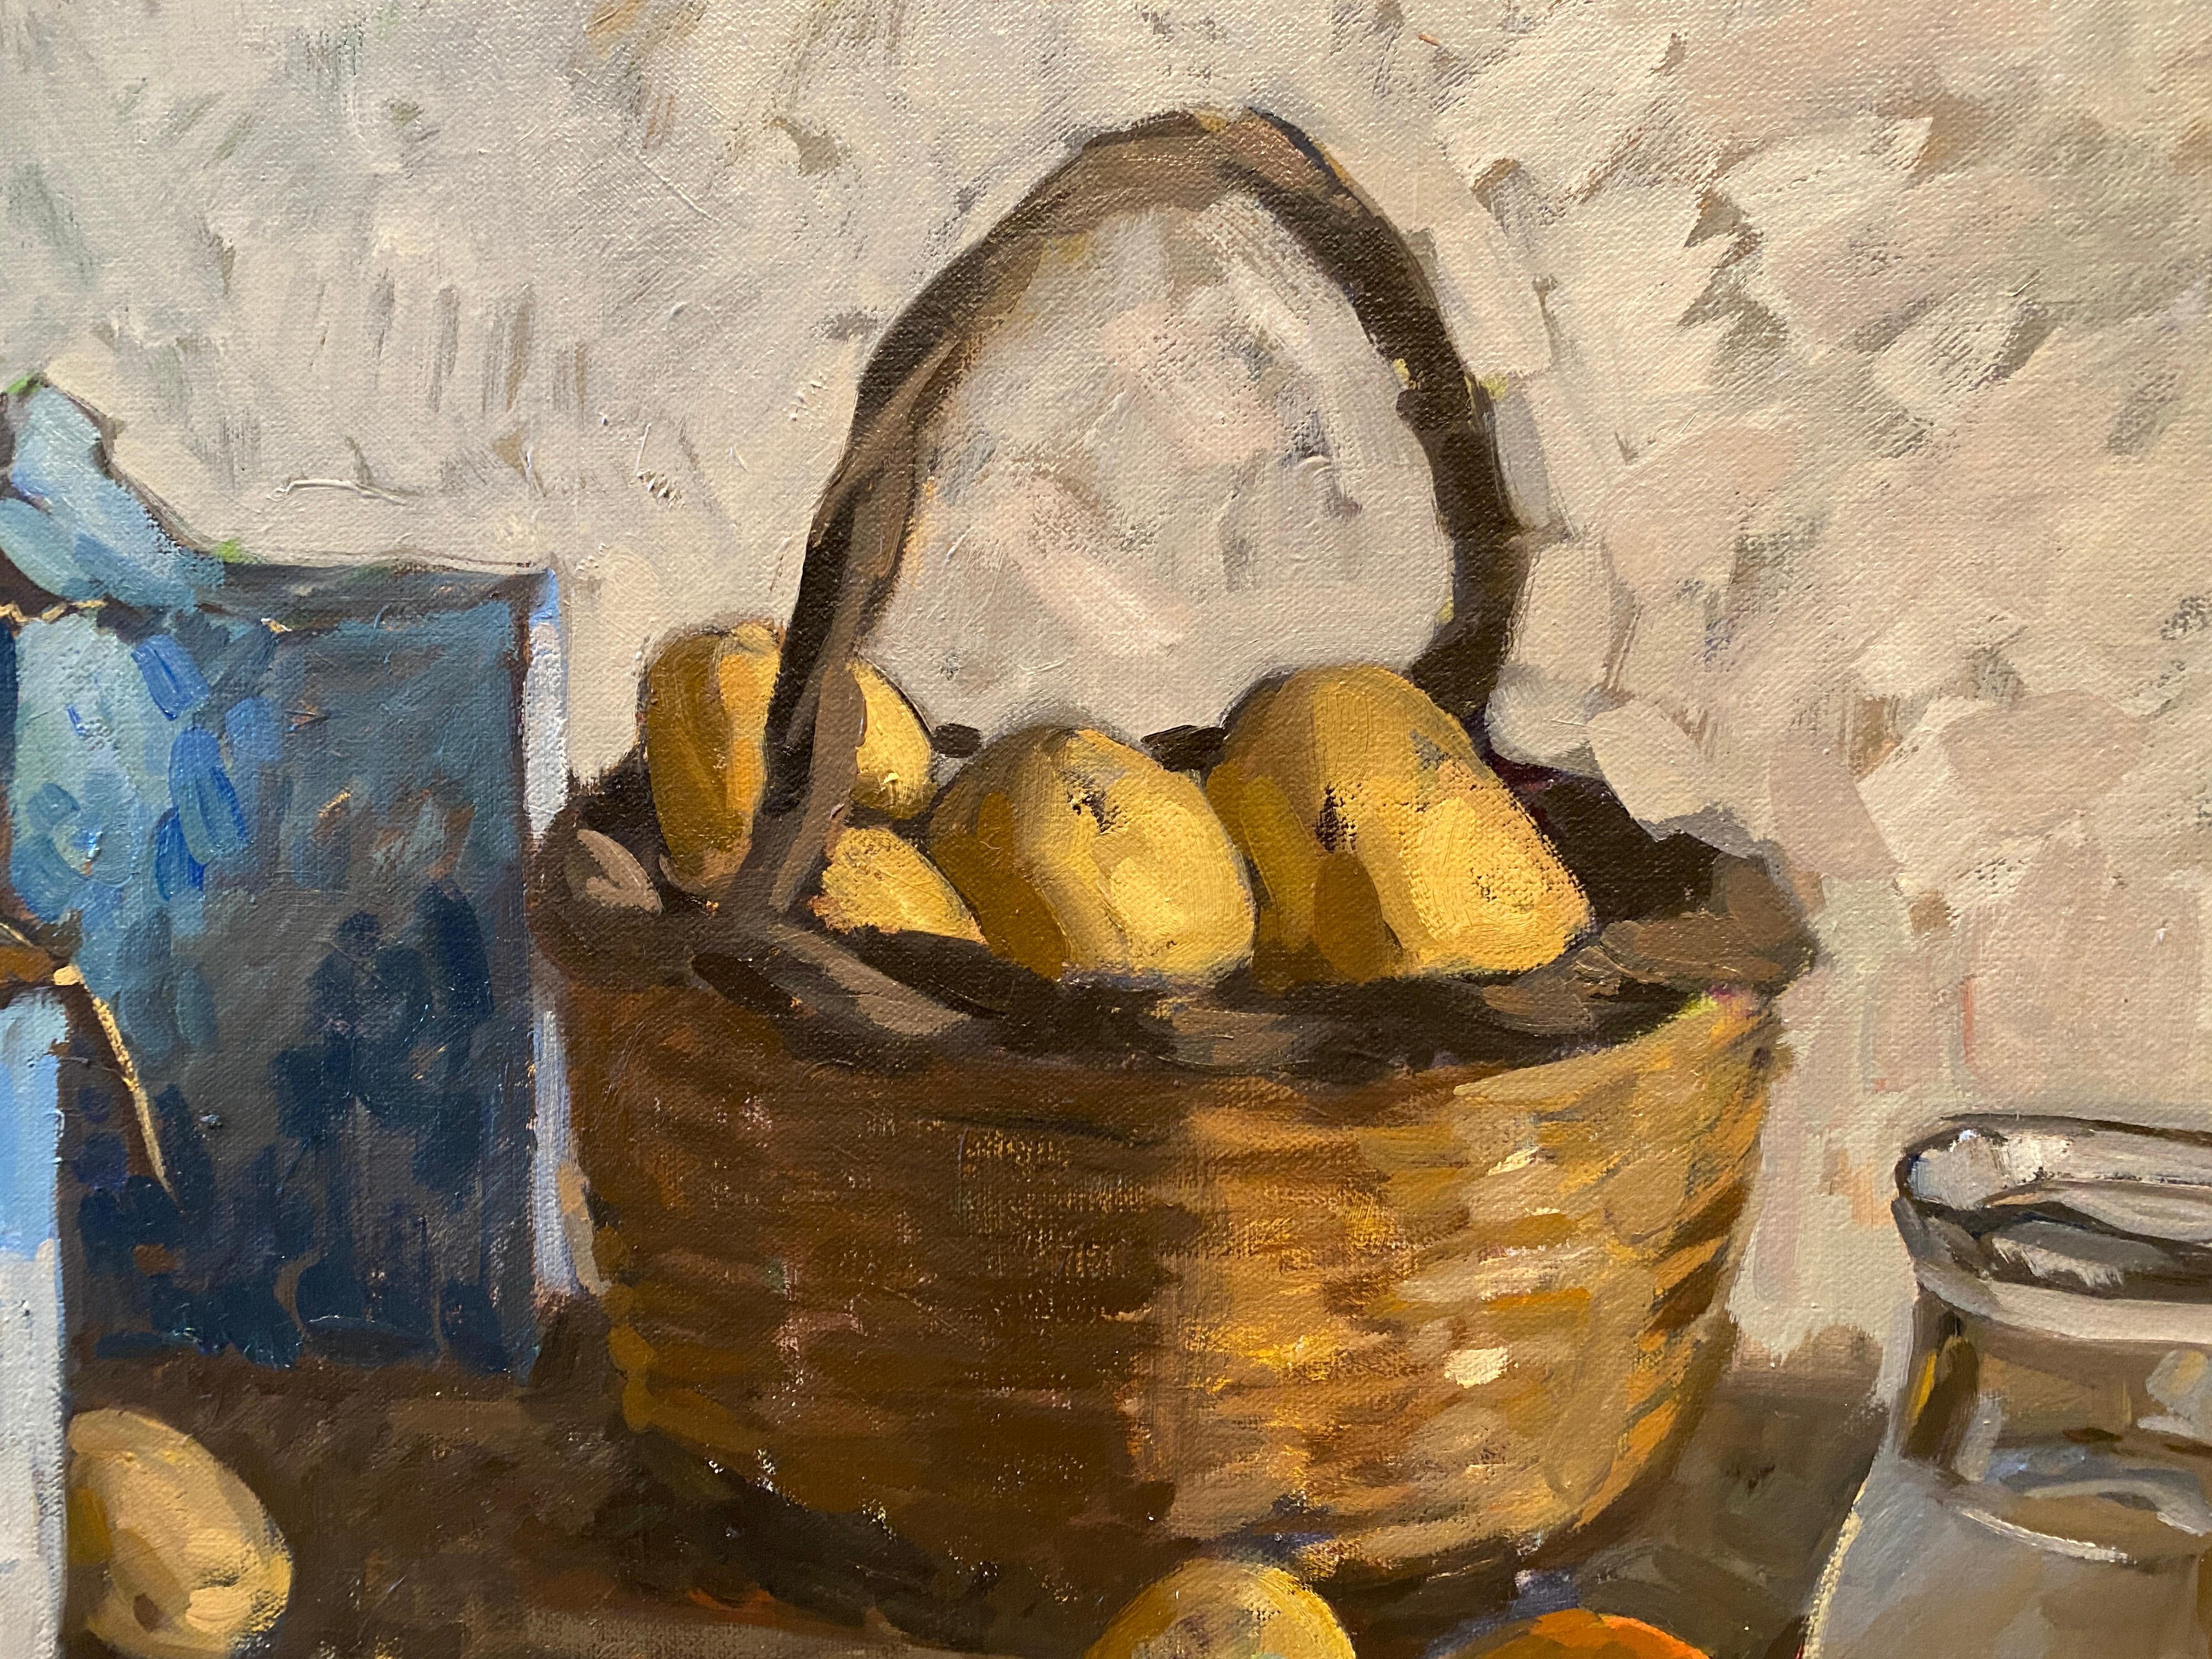 A still life oil painting of a basket of potatoes and a box of salt on a wooden table. This work reflects the artists's discerning eye in the discovery of beauty amongst ordinary, everyday objects. The blue box of salt is complimented by the blue